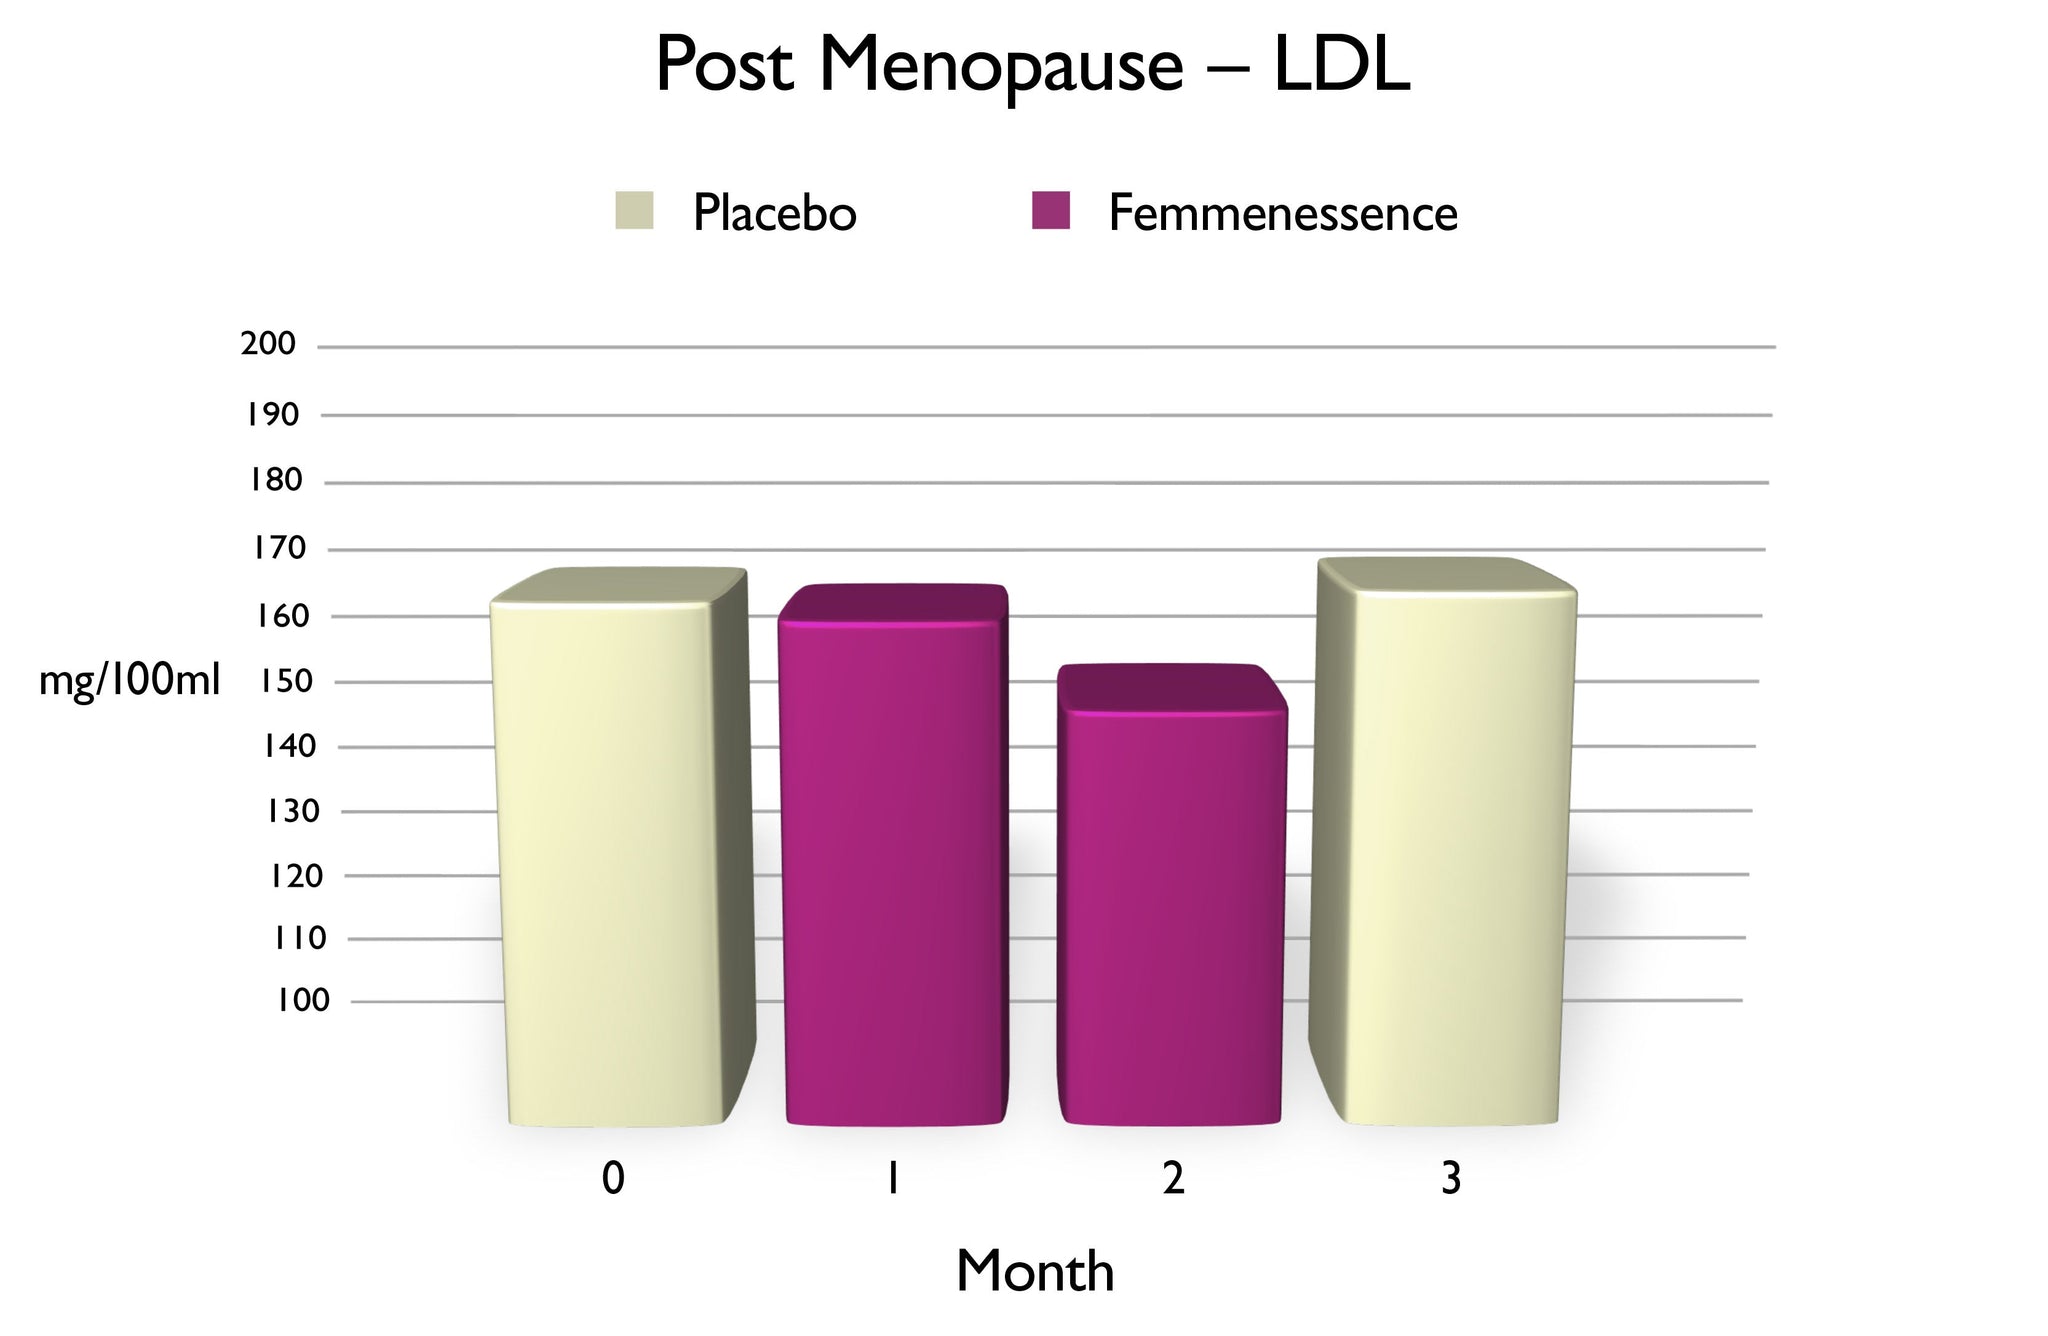 Chart of Post Menopause LDL, using Femmenessence vs. placebo, over three-month period